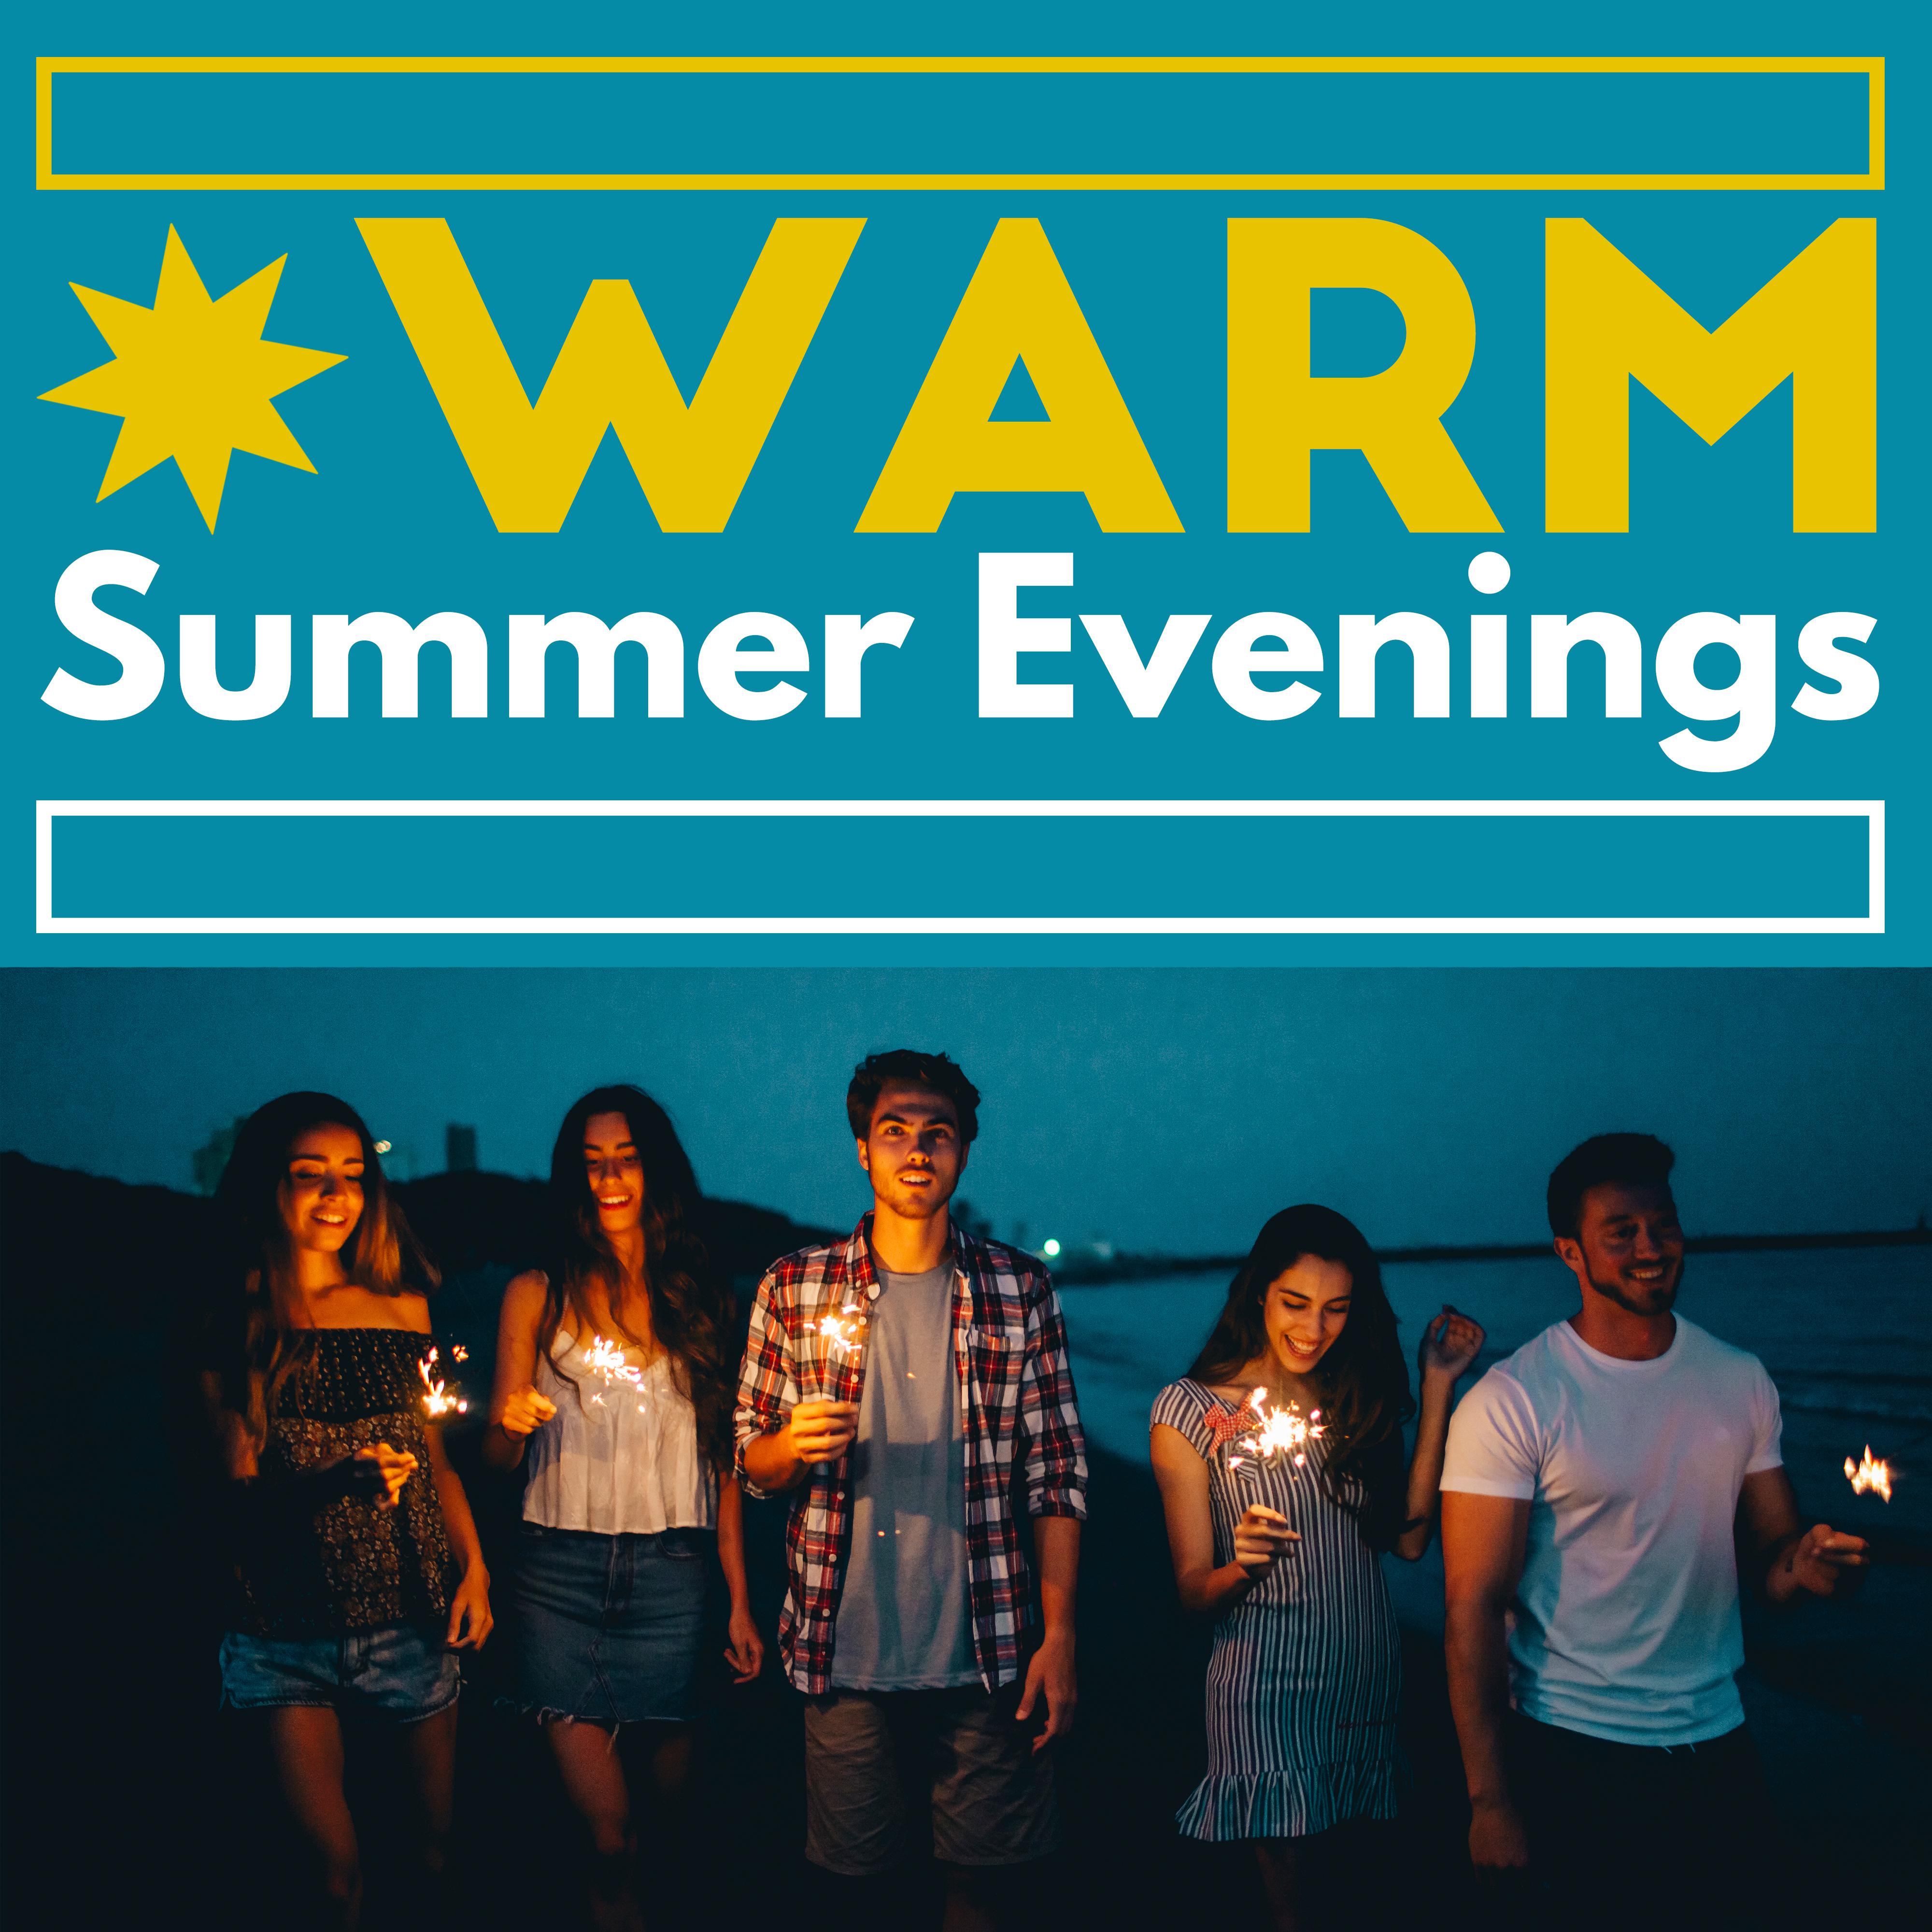 warm summer evenings – amazing jazz music collection for